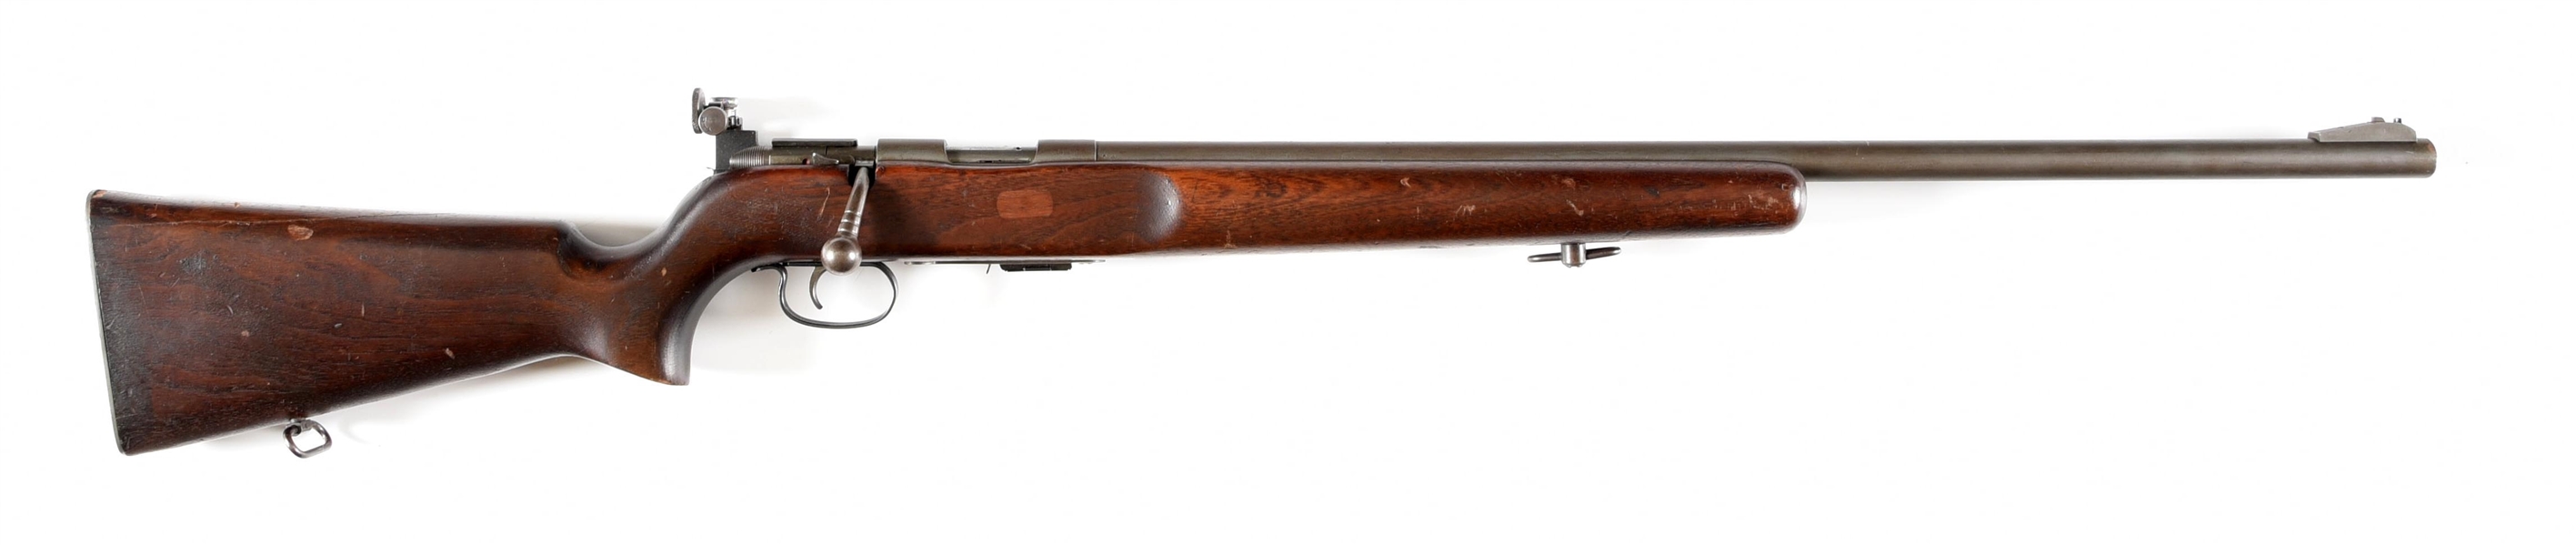 (C) REMINGTON 513-T BOLT ACTION RIFLE, NAVY MARKED.